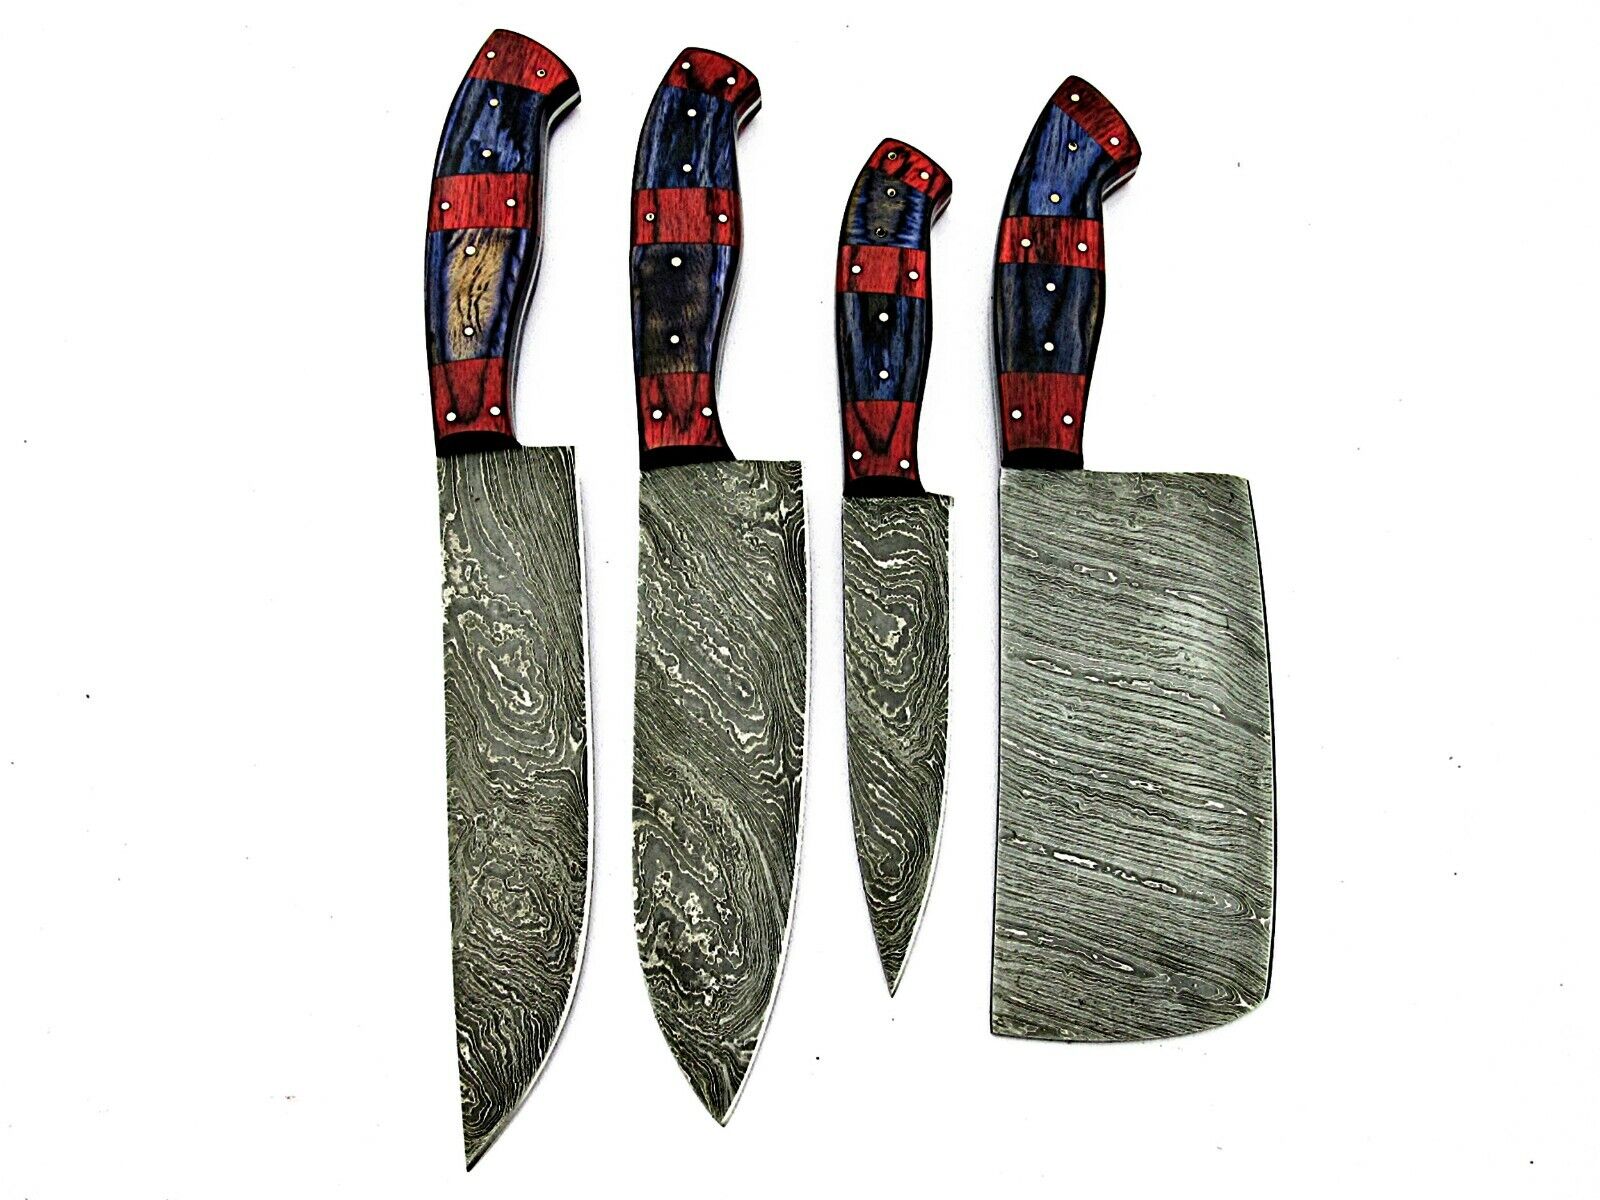  Custom Handmade Damascus Steel Chef Knives 4 pies With Lather Sheath  